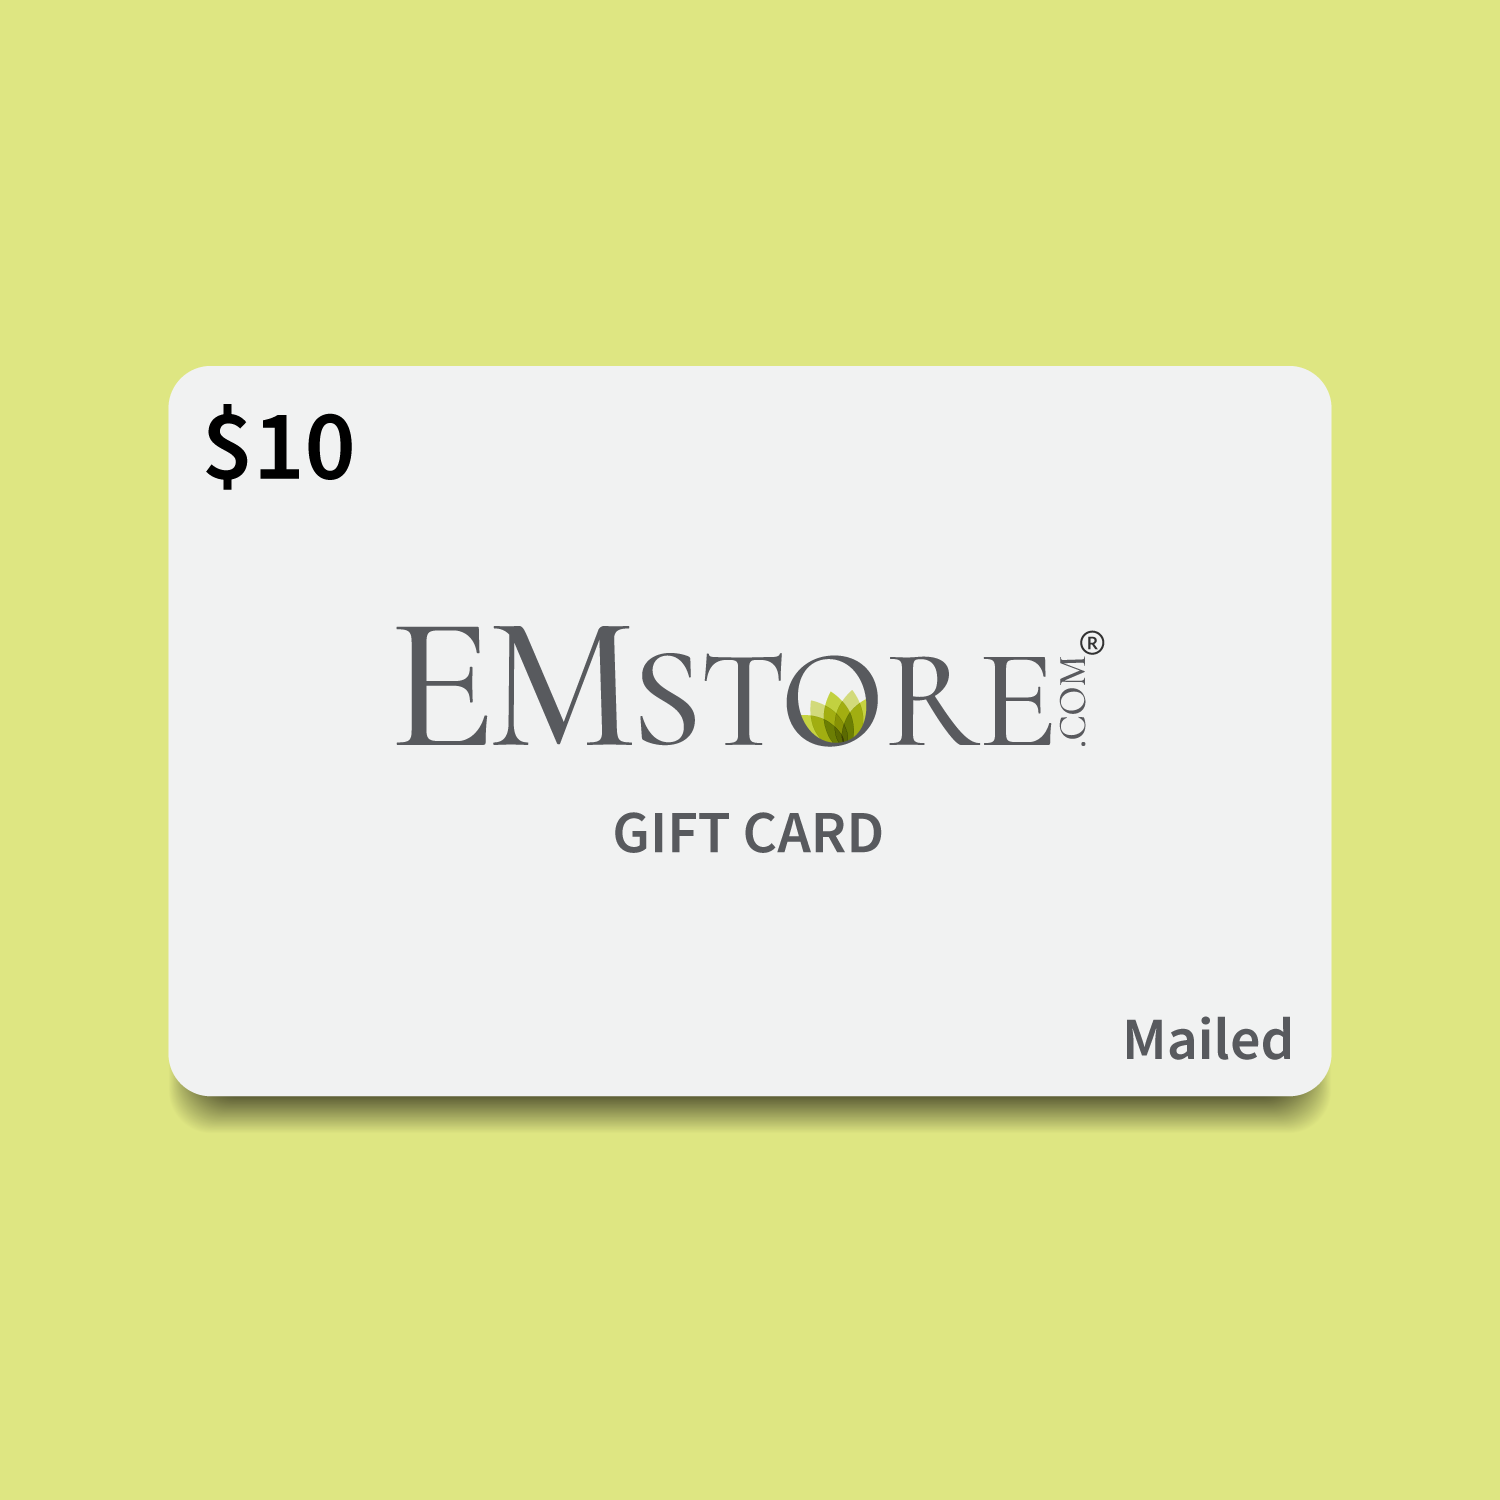 EMstore Gift Card (Mailed)